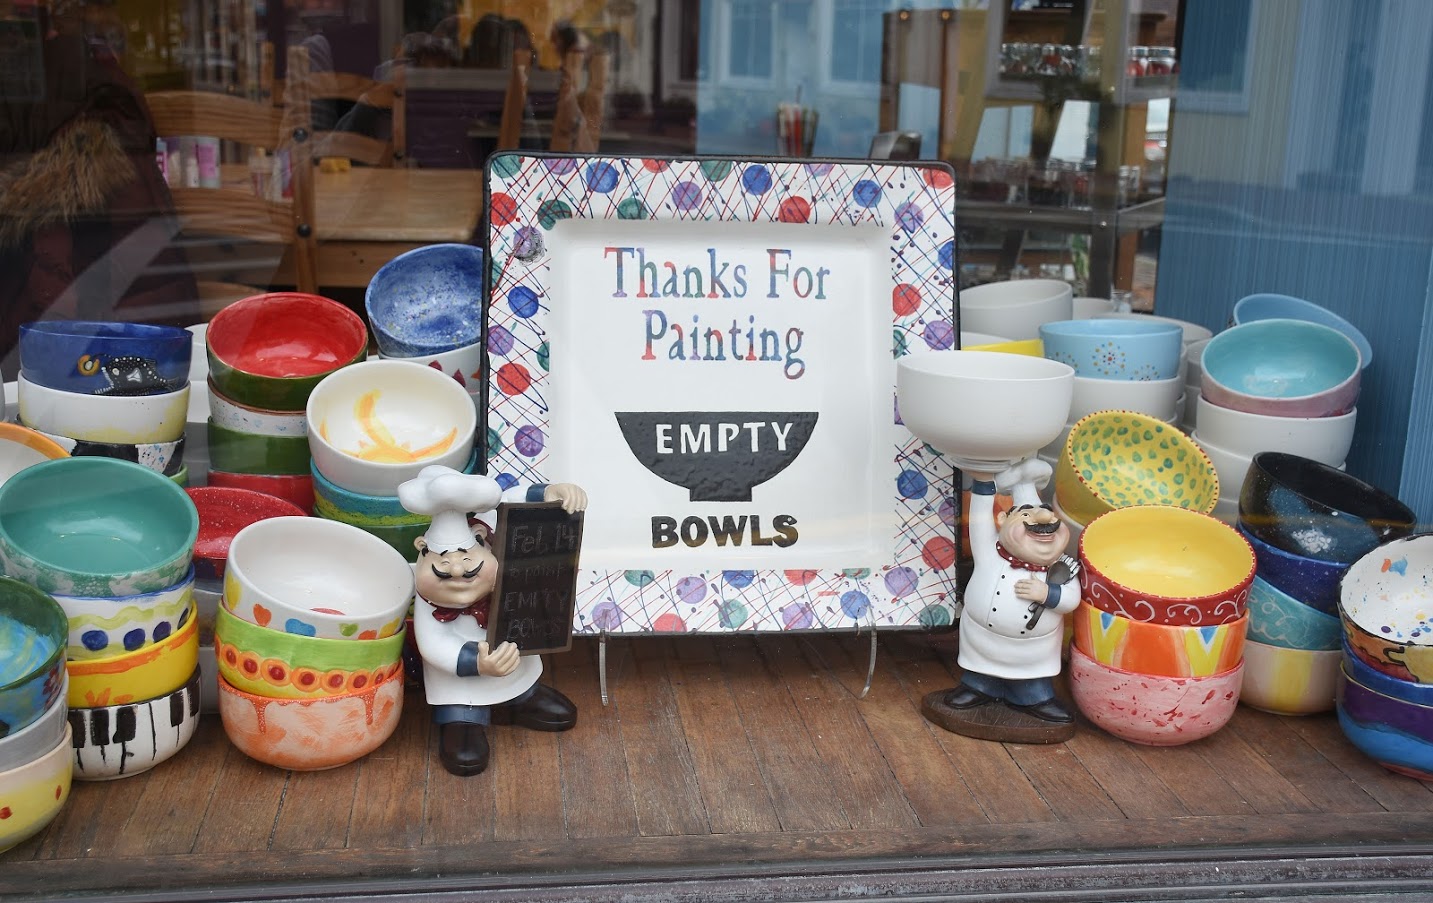 A thank you sign surrounded by ceramics